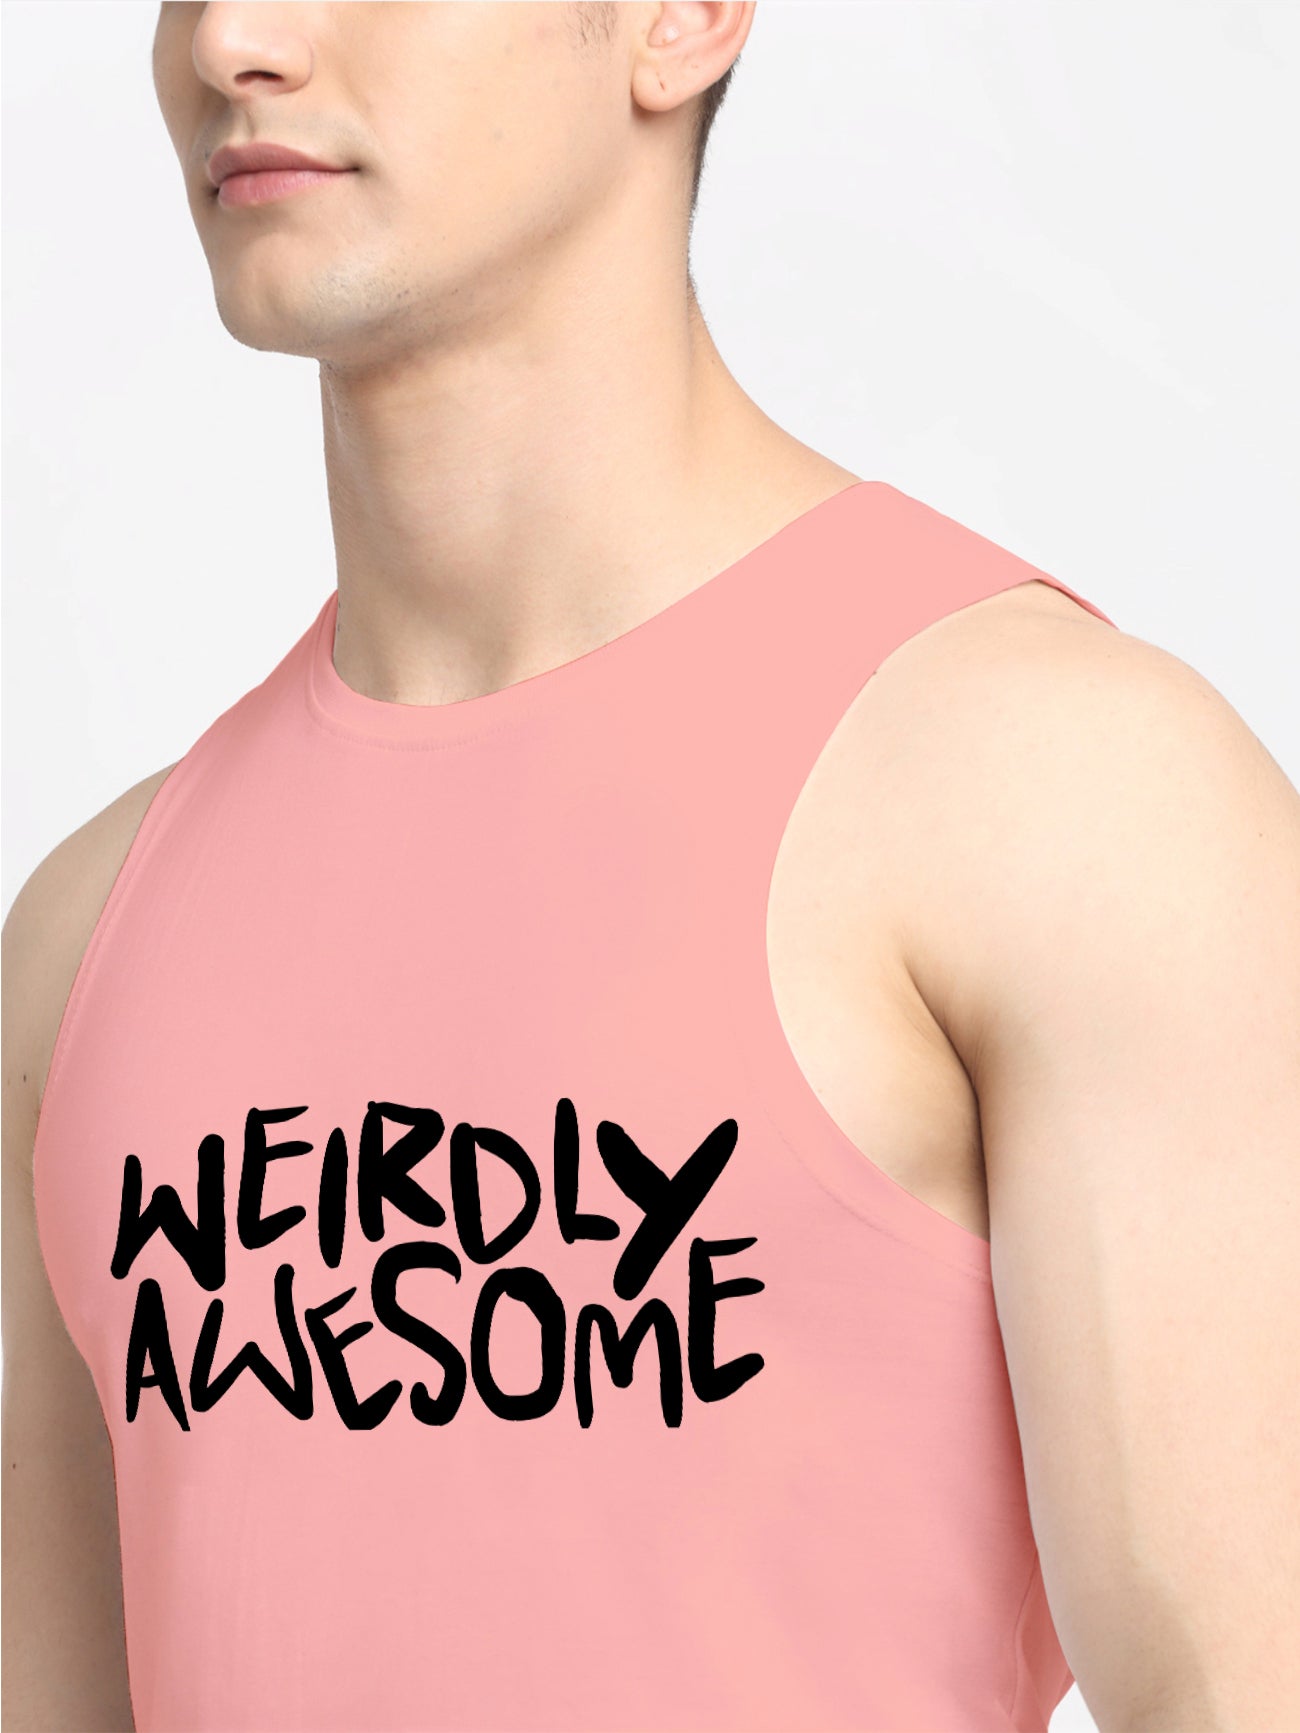 Men's Weirdly Awesome Round Neck Sports Gym Vest - Friskers